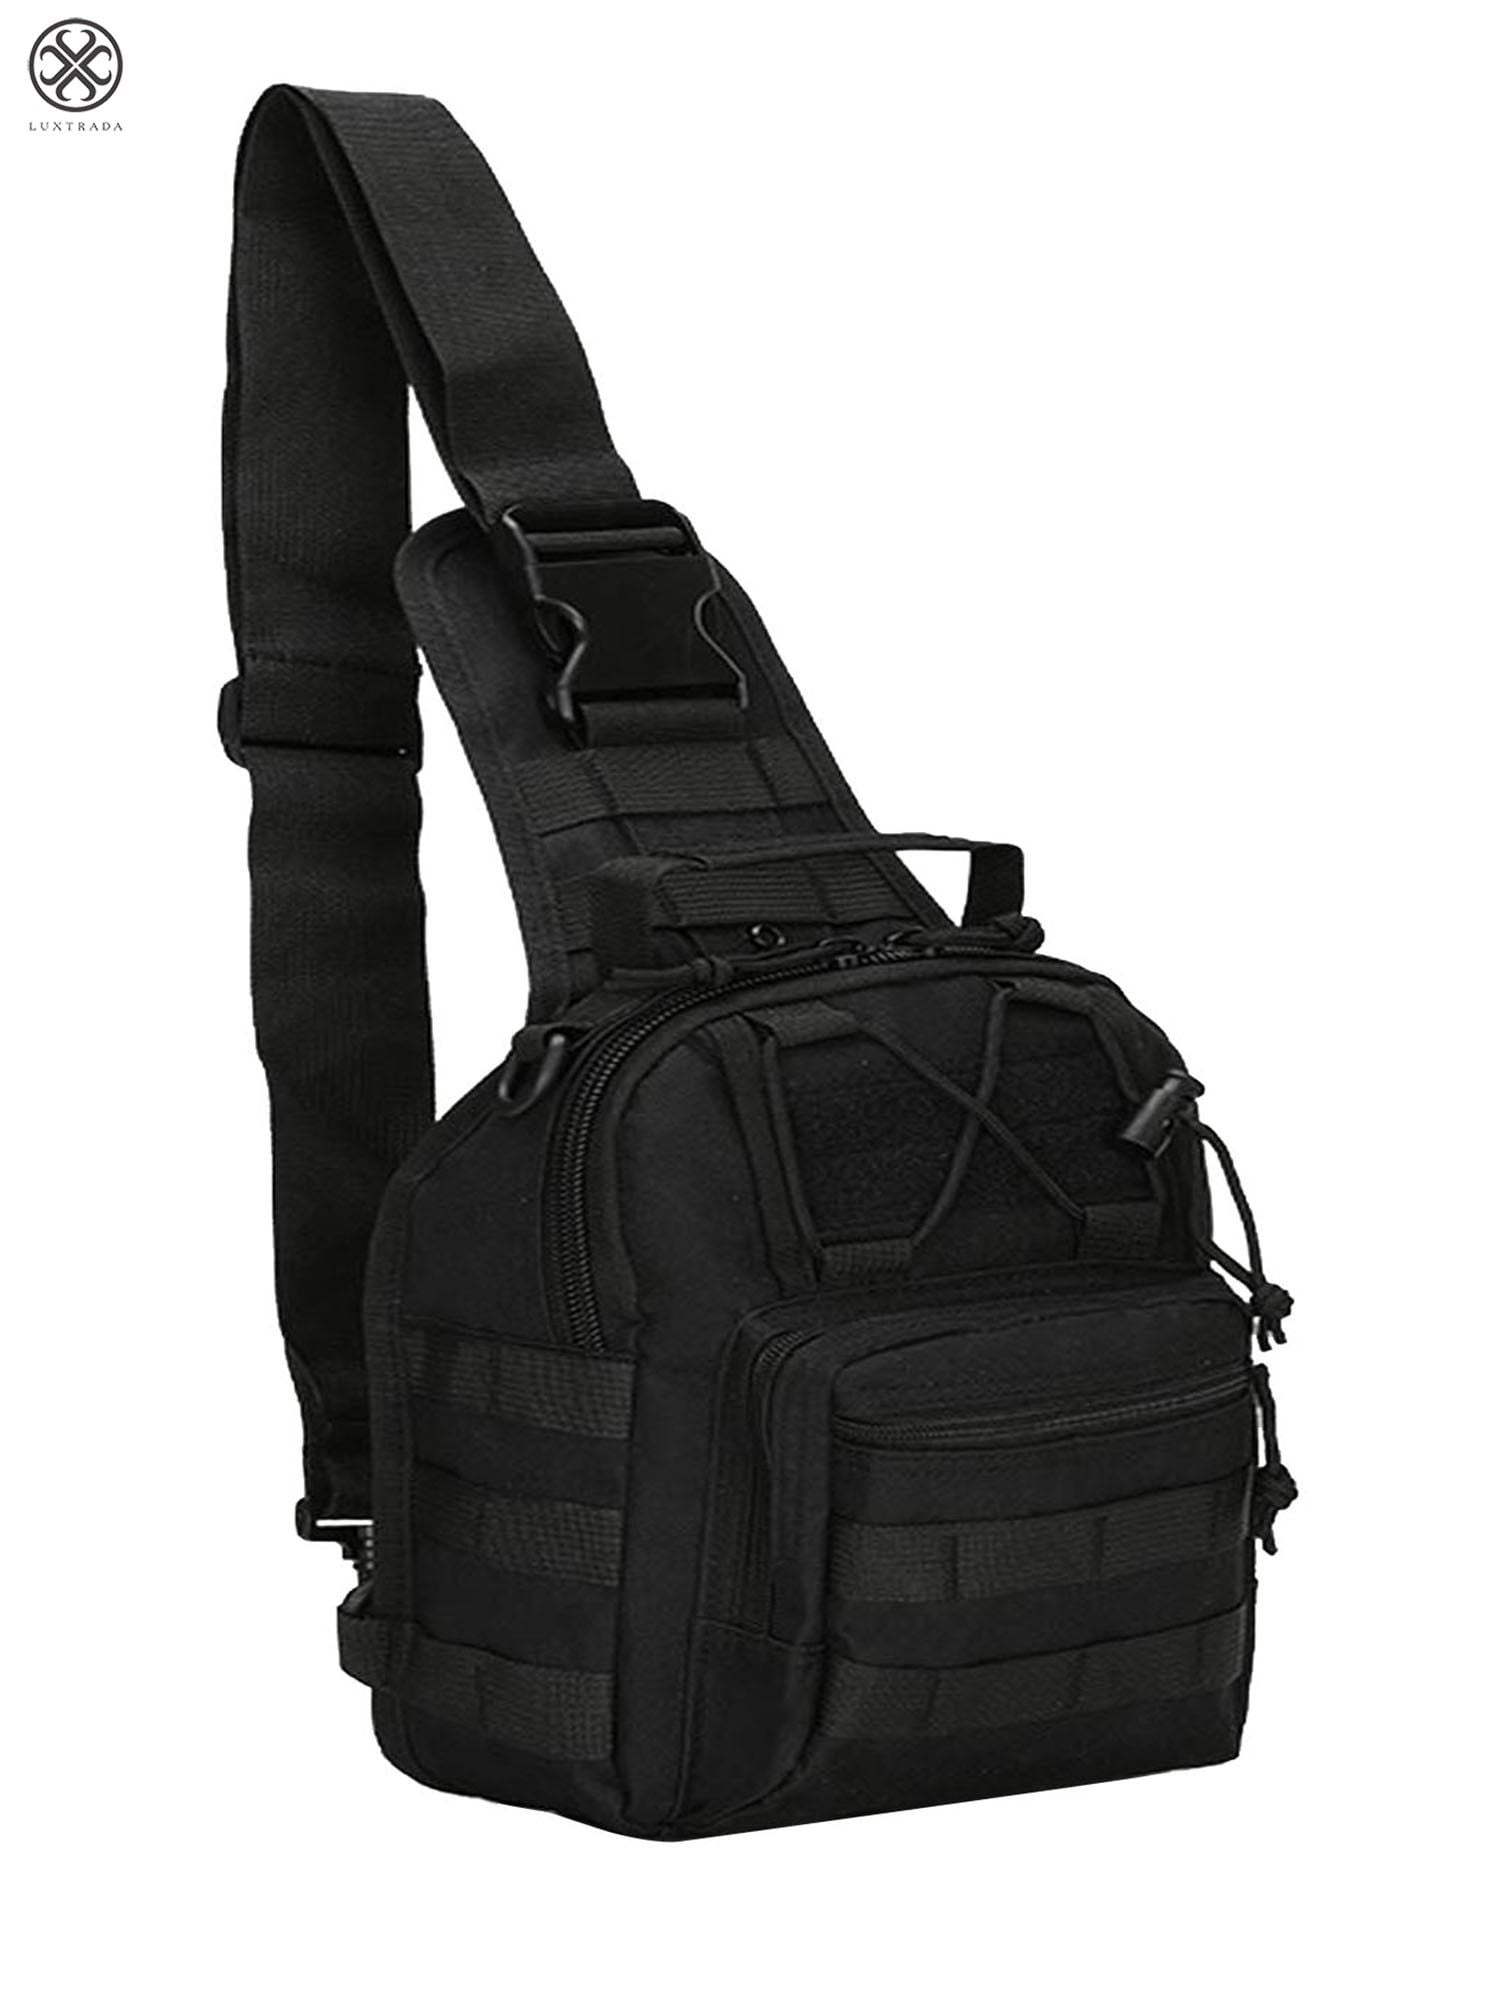 Luxtrada Men Daily Shoulder Tactical Backpack Army Tacti Duffle Nylon ...